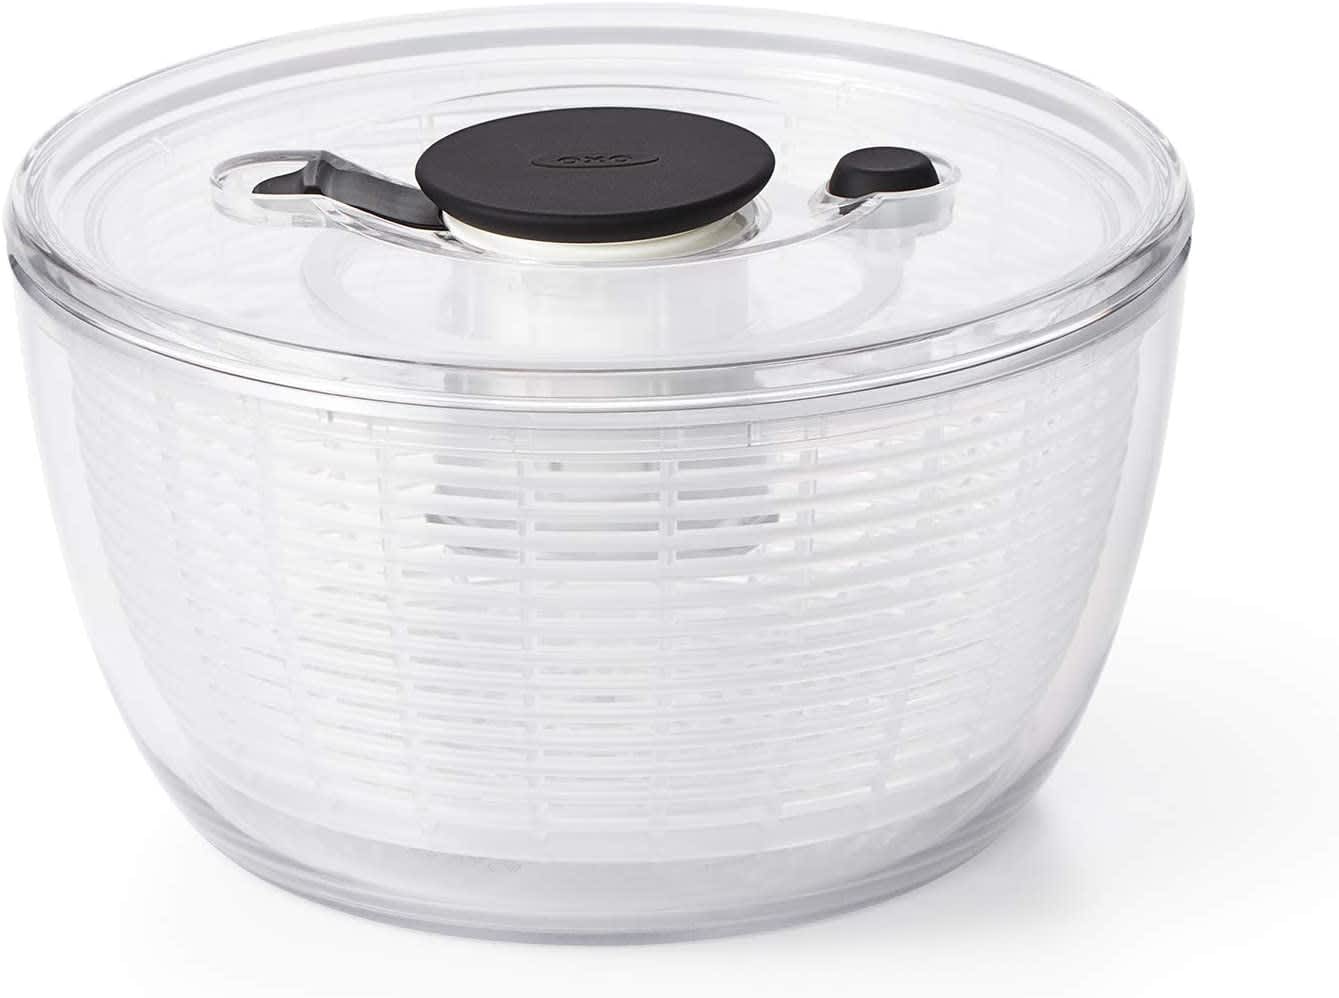 The 5 Best Products from OXO